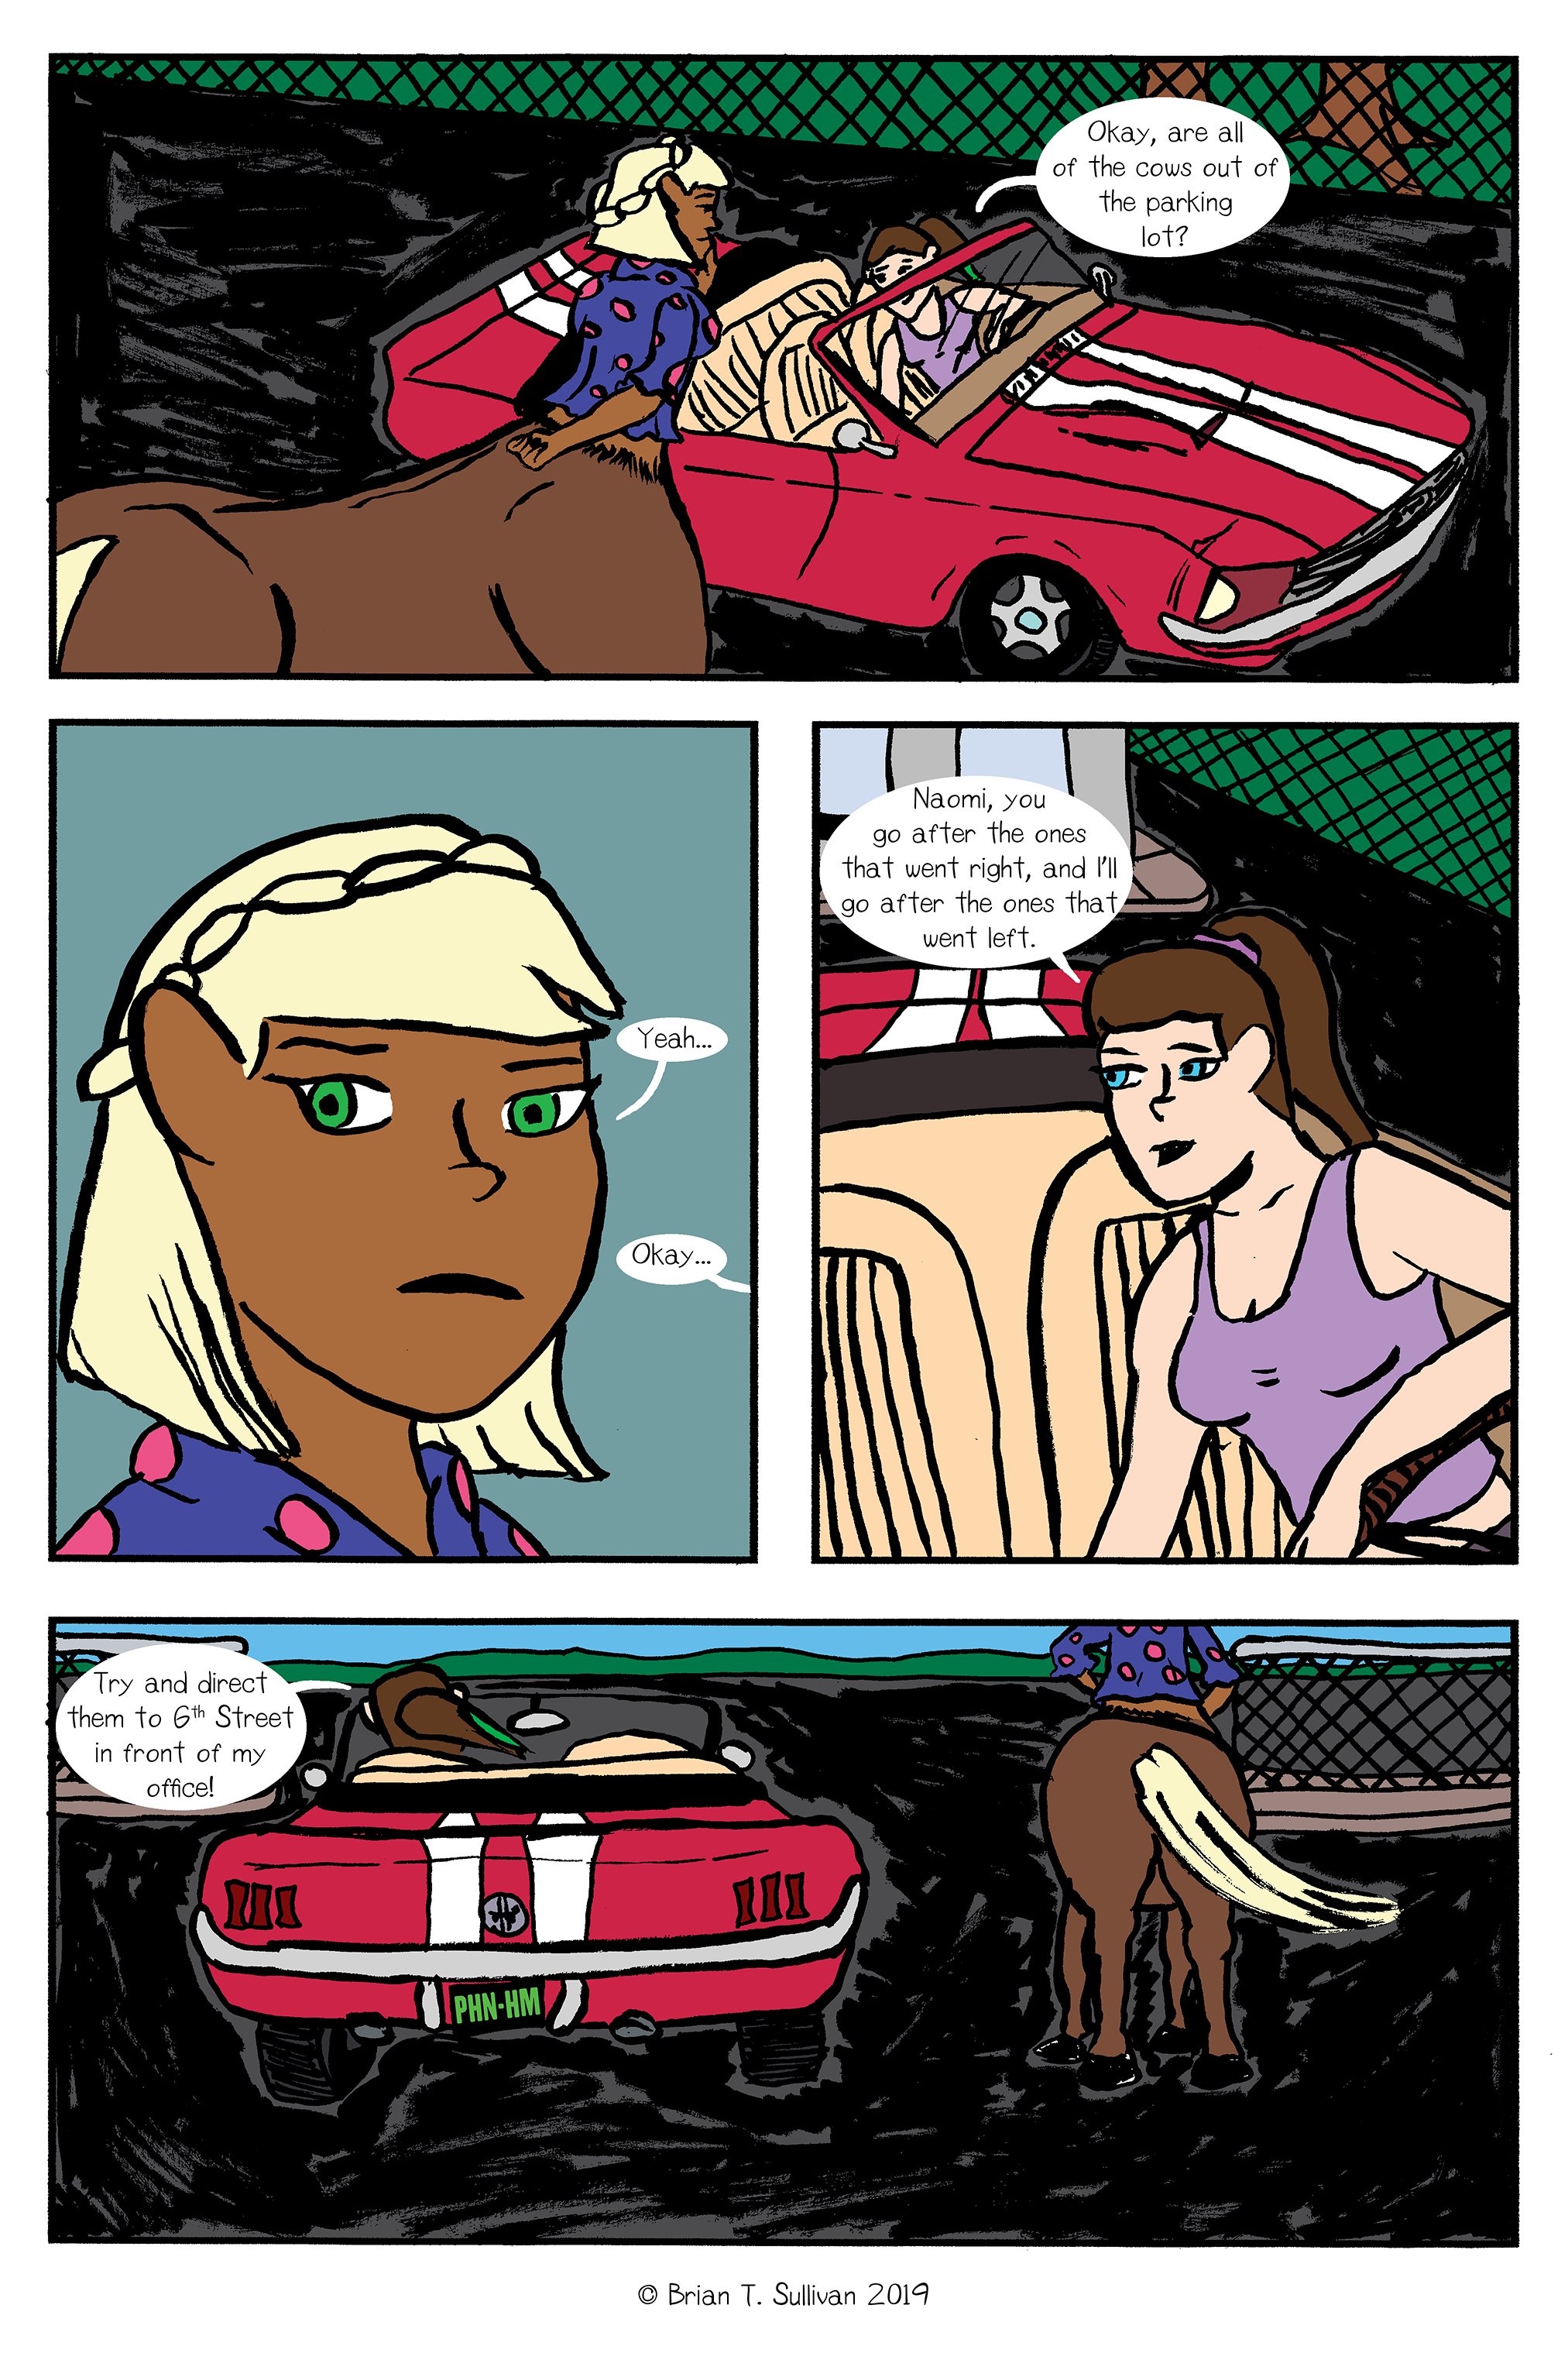 Issue 22, Page 2